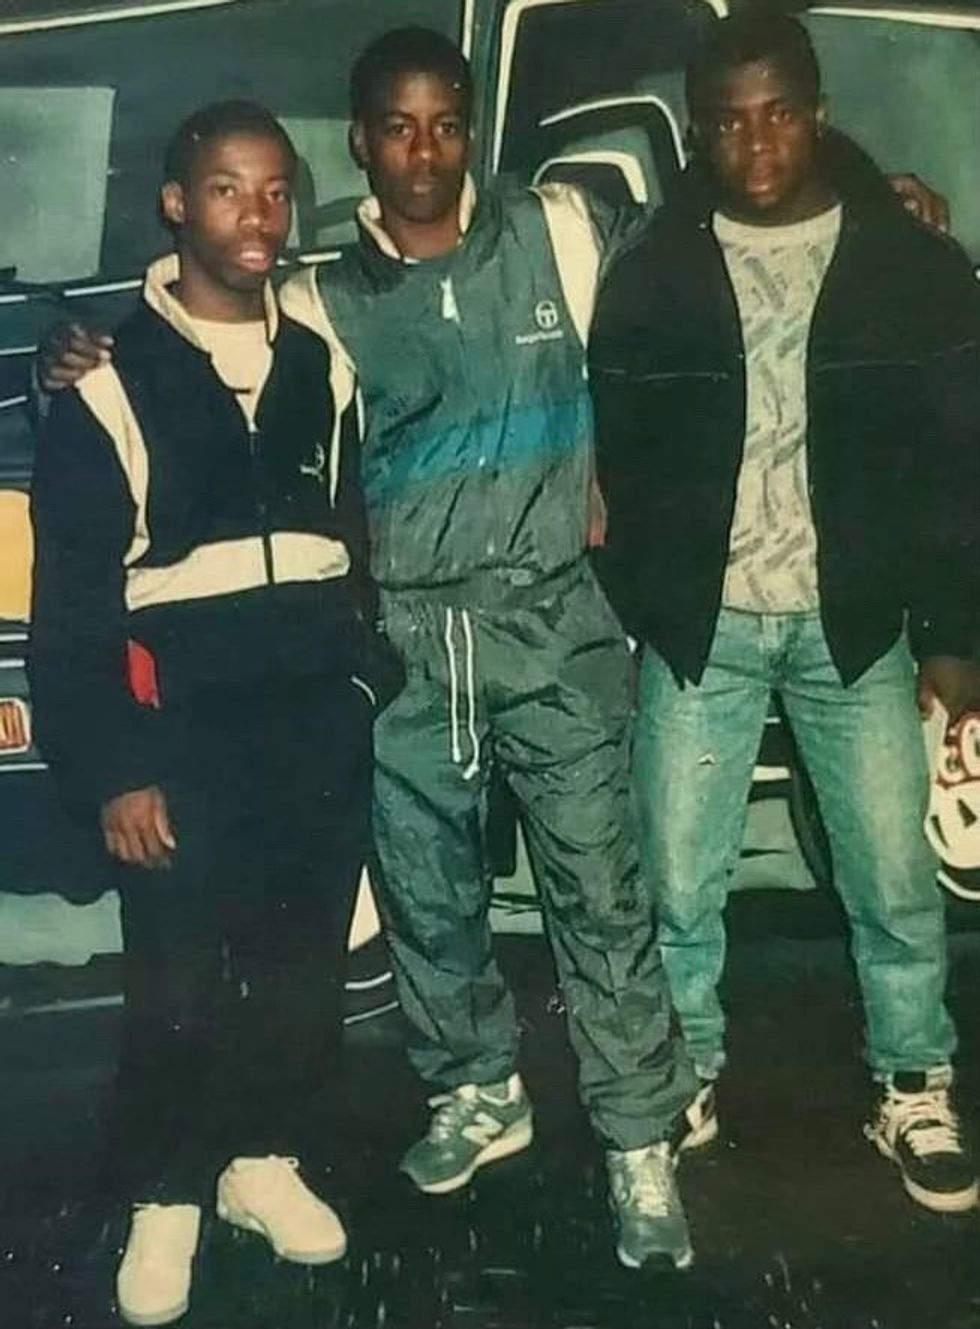 picture from the '80s of guys wearing street clothes